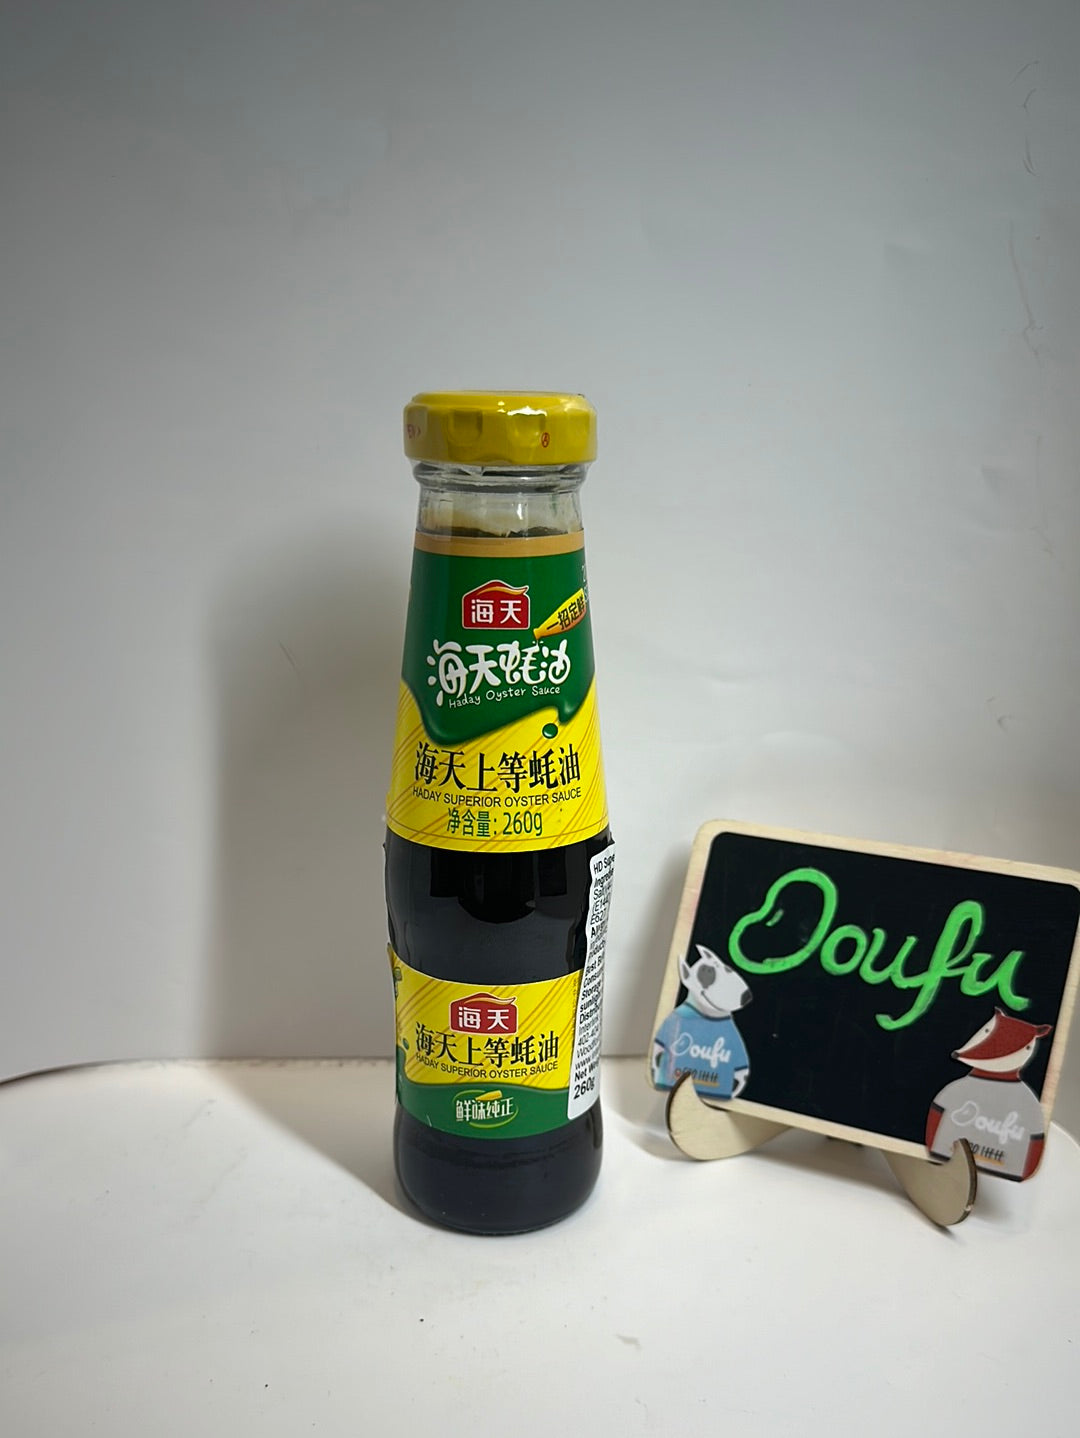 HD Superior OYSTER SAUCE 海天上等耗油 260g